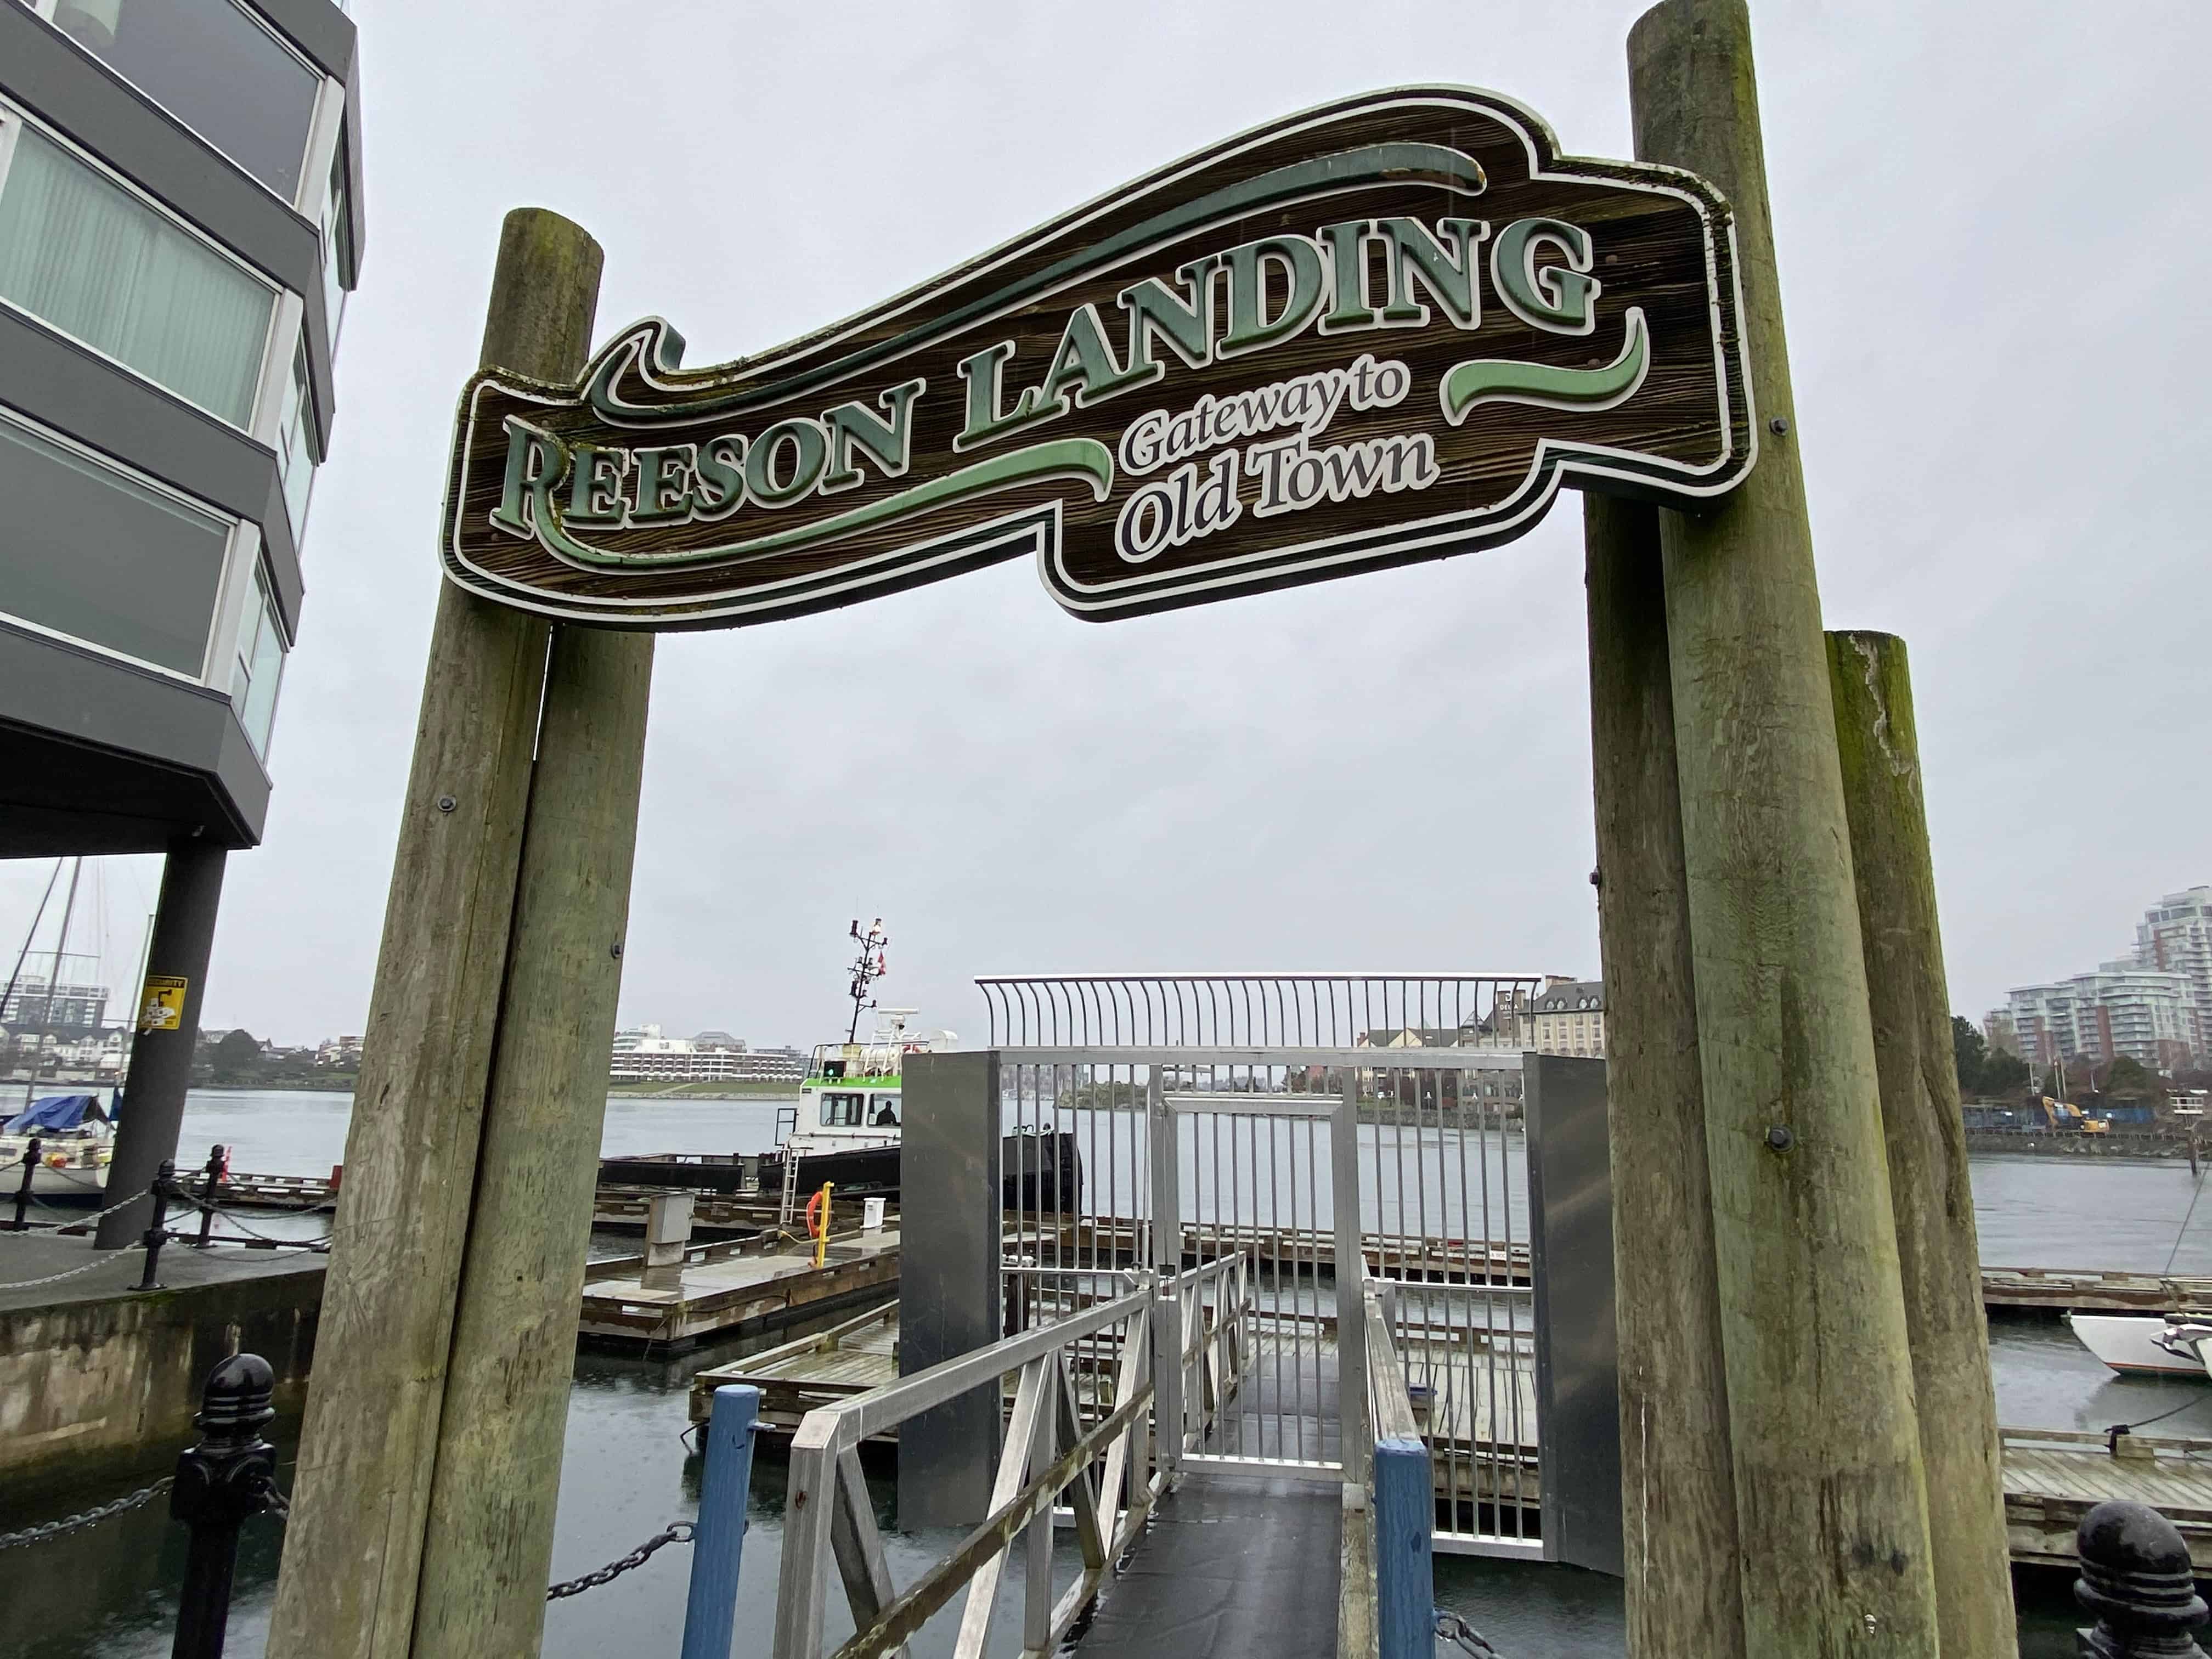 This is the first sign you'll see from Johnson Street on the Inner Harbour Walkway in Victoria BC.  It's called Reeson Landing Gateway to Old Town.